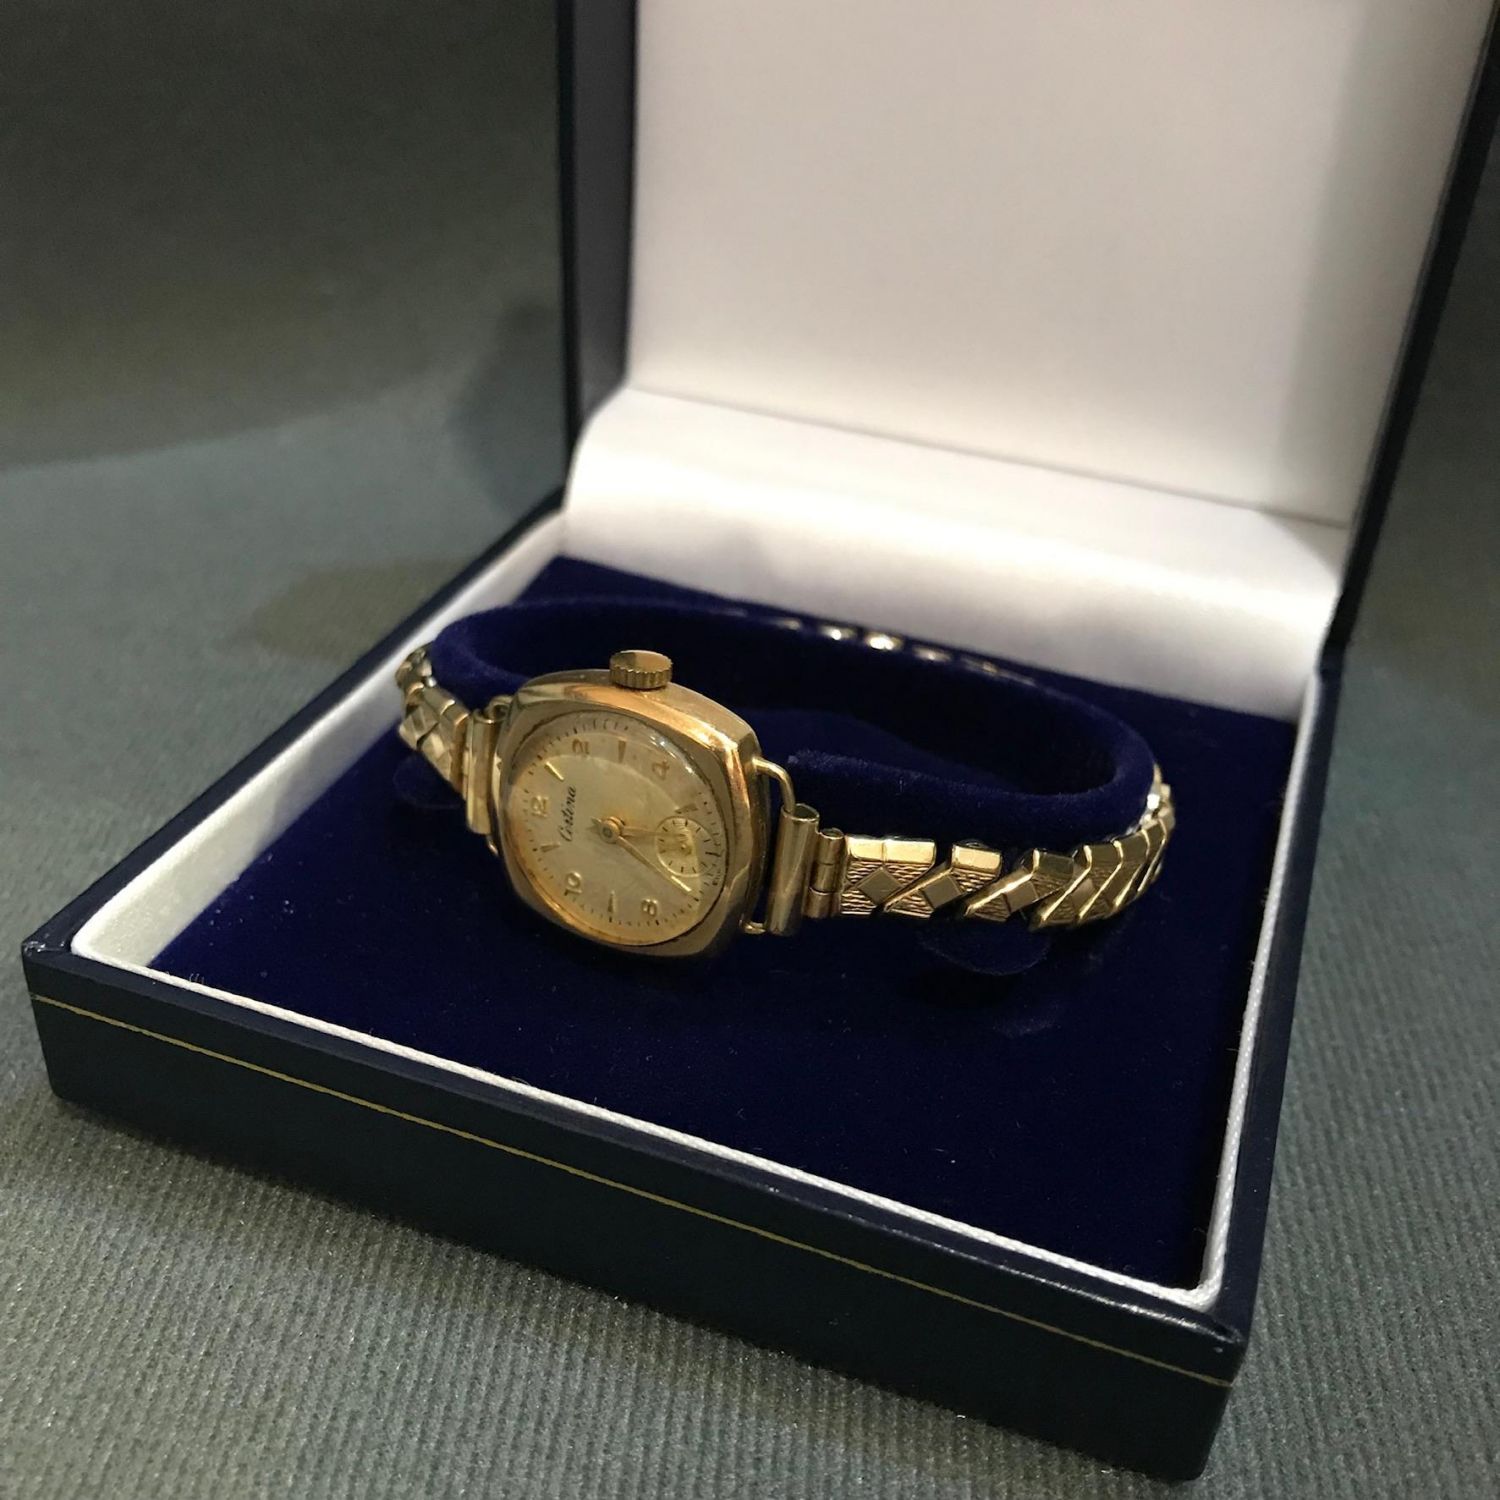 Gold Ladies Certina Watch - Watches - Hemswell Antique Centres